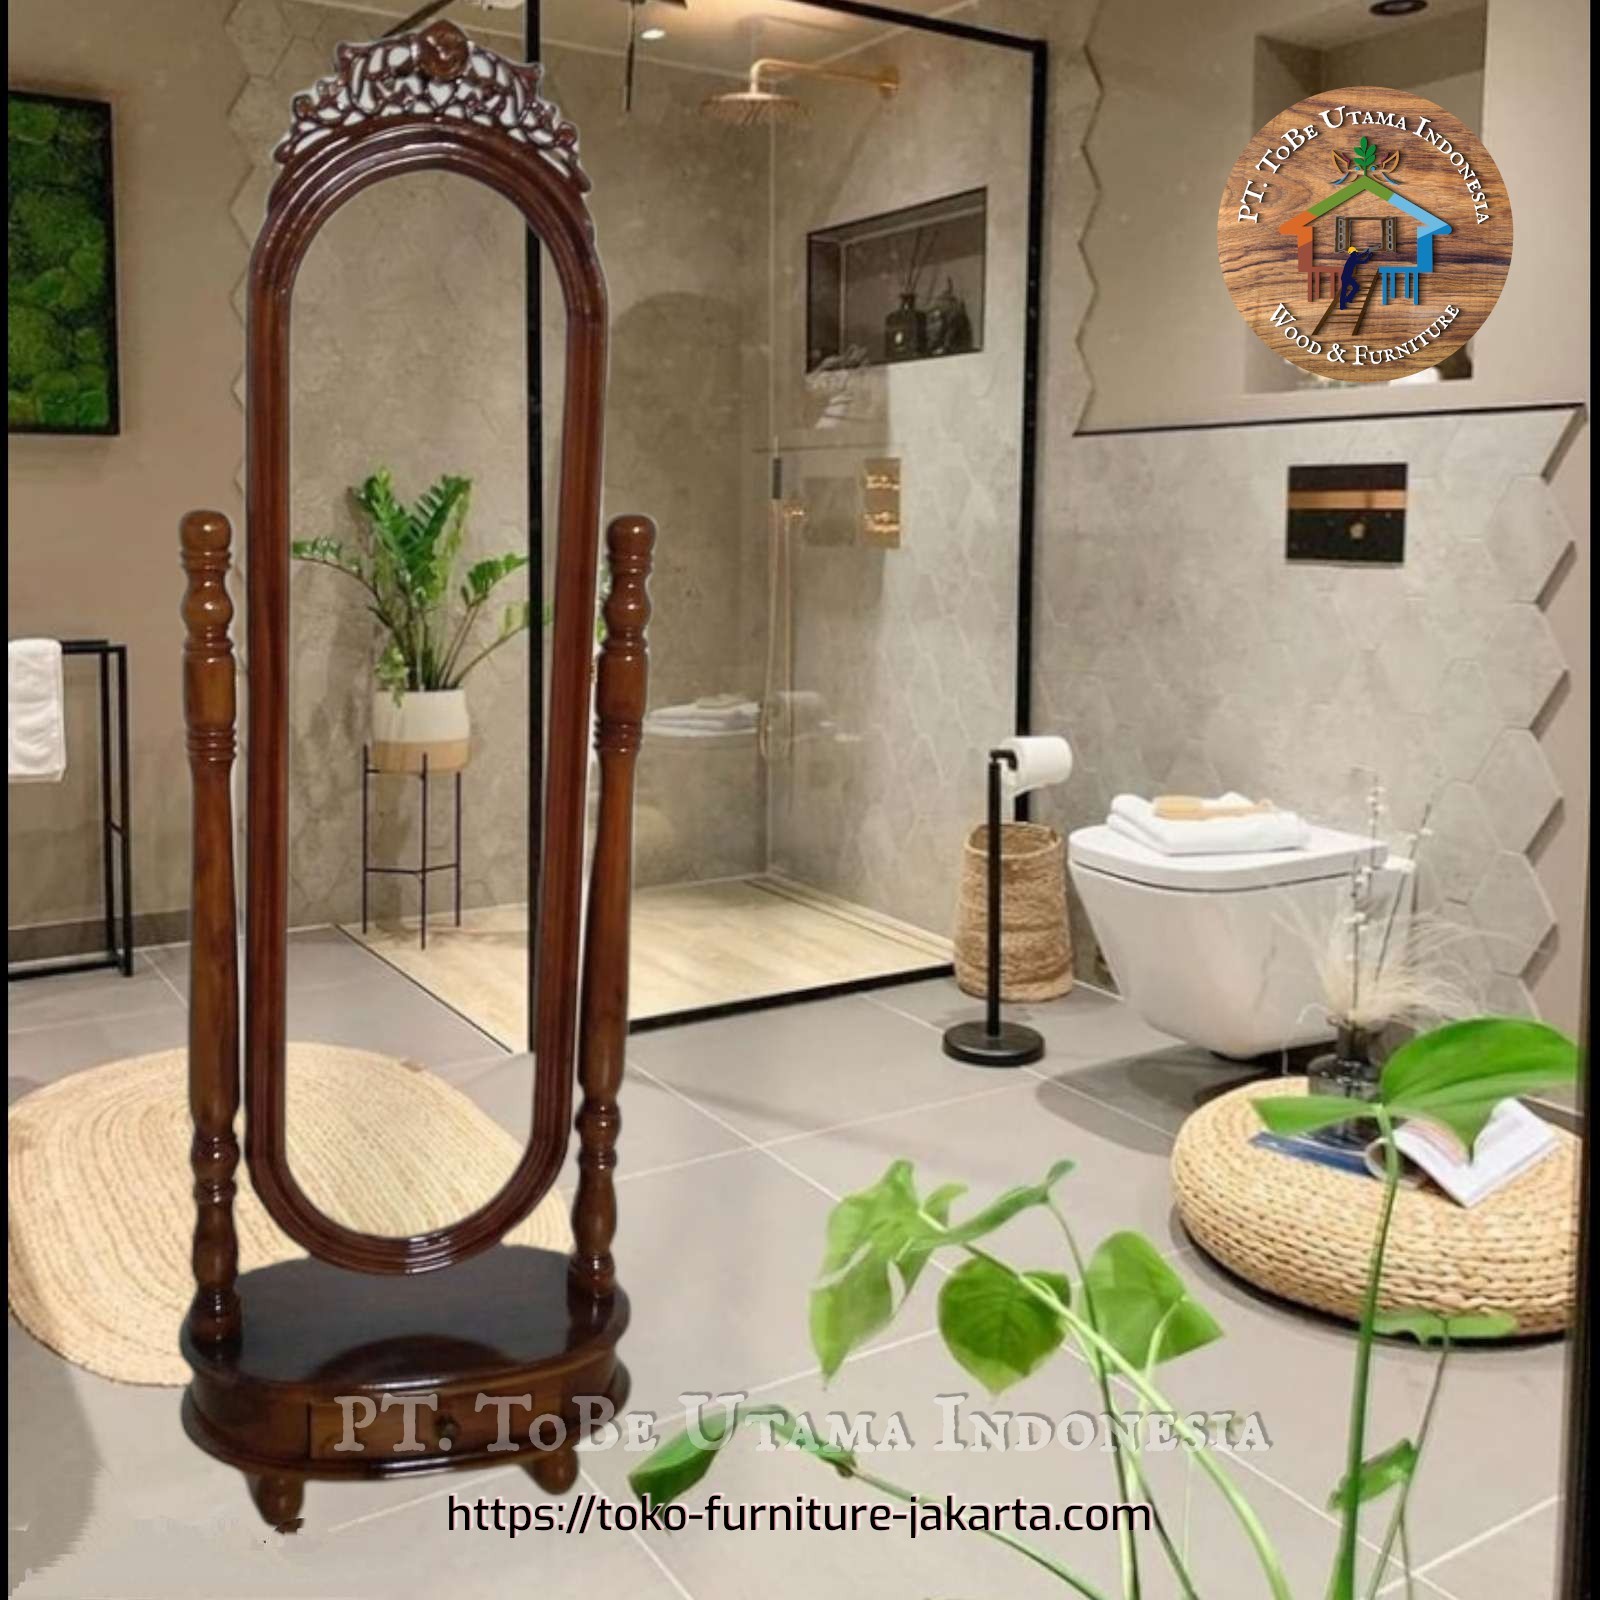 Accessories - Wooden Mirrors: Princes Mirror made of teakwood, mahogany wood, glass (image 1 of 1).